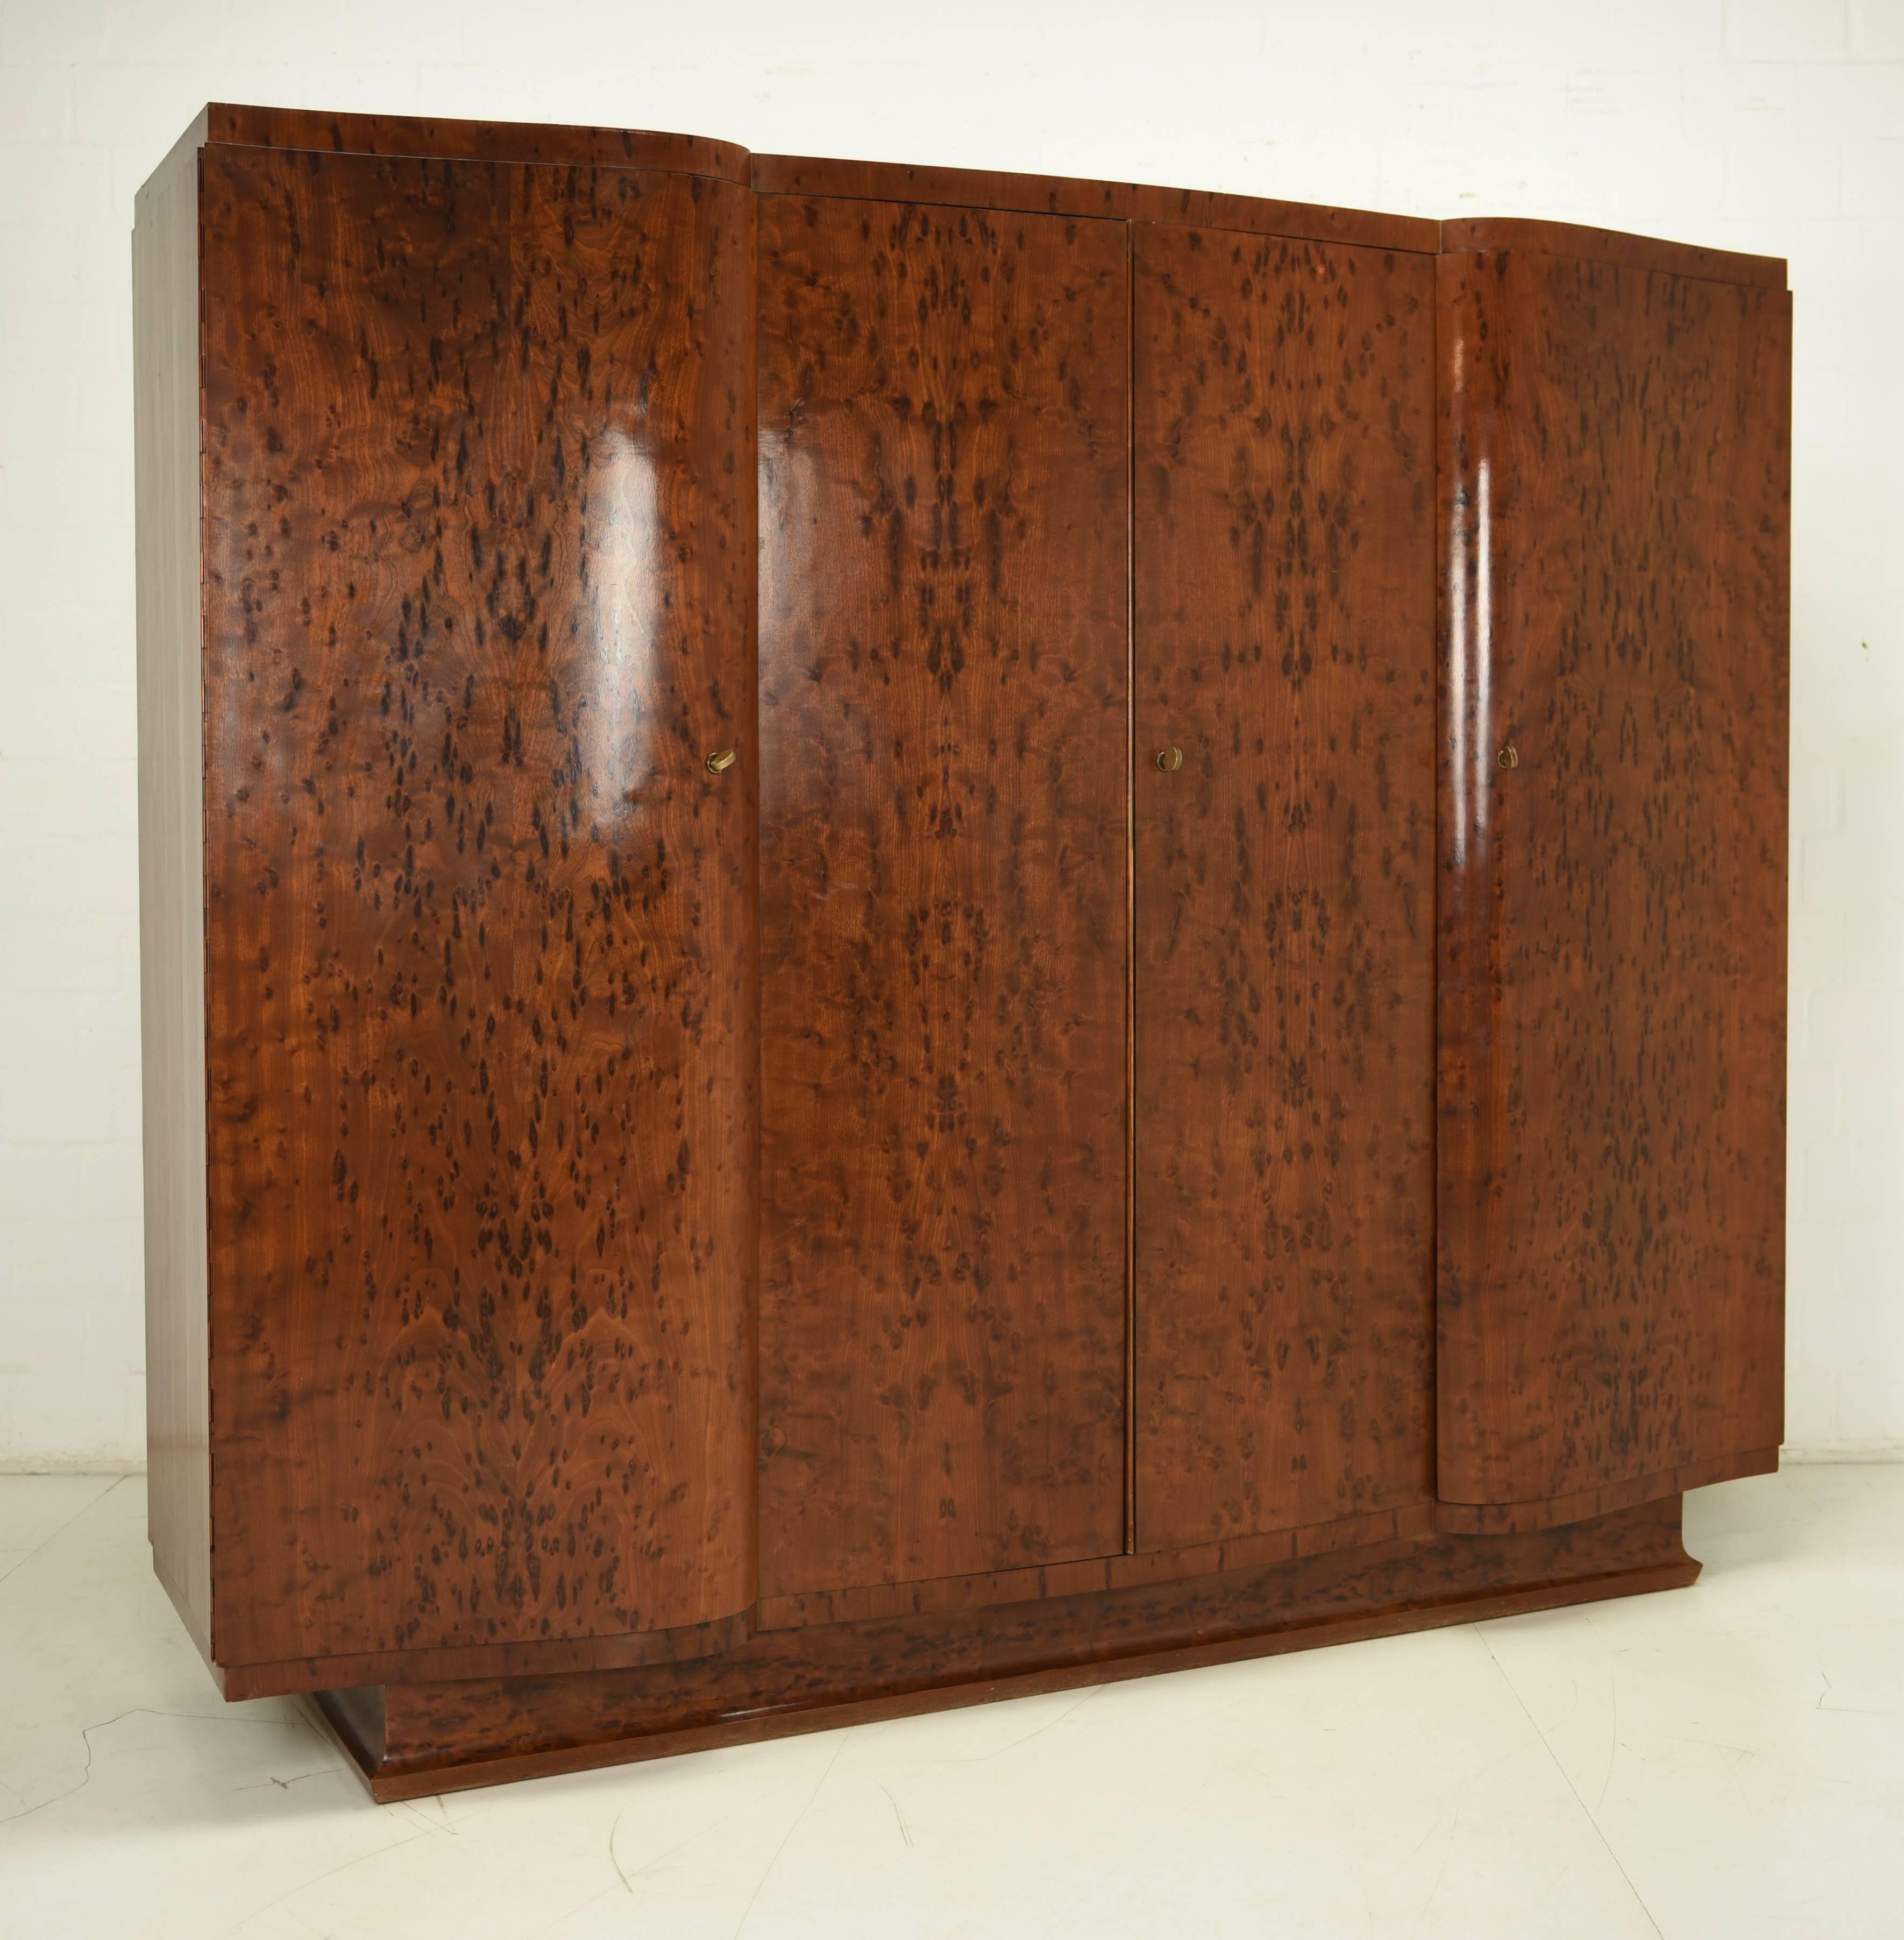 A complete Art Deco bedroom set from, circa 1930. Everything is held in a brown, extraordinary rootwood veneer with an astonishing grain. Great black points accentuate the veneer and create a wonderful wood atmosphere. The fittings and locks are